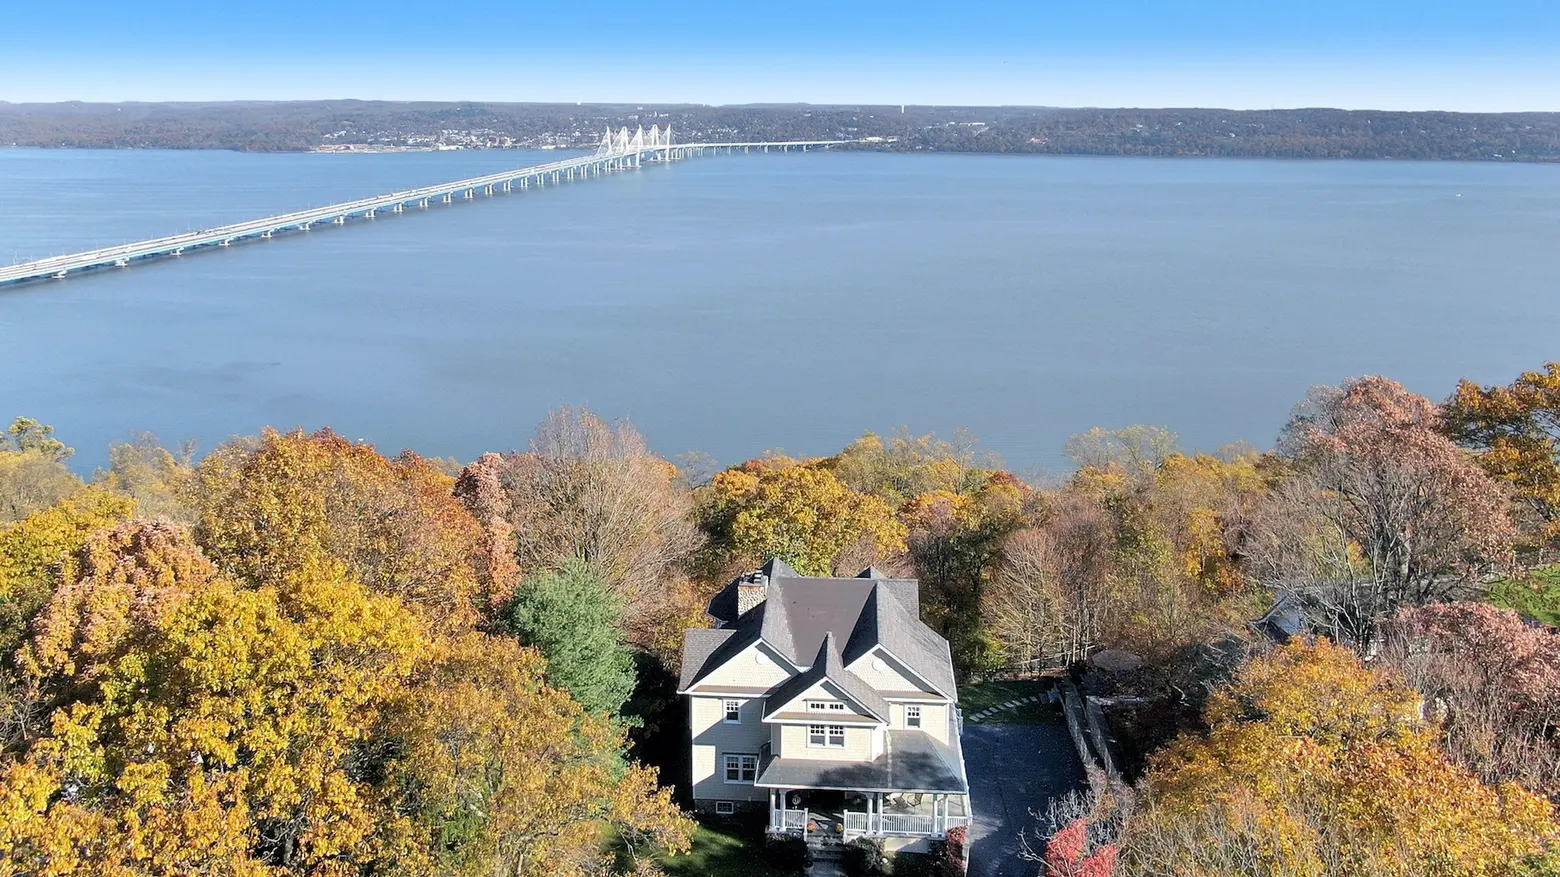 $1.7M cliffside Colonial in Nyack has a two-story watchtower facing the Hudson River